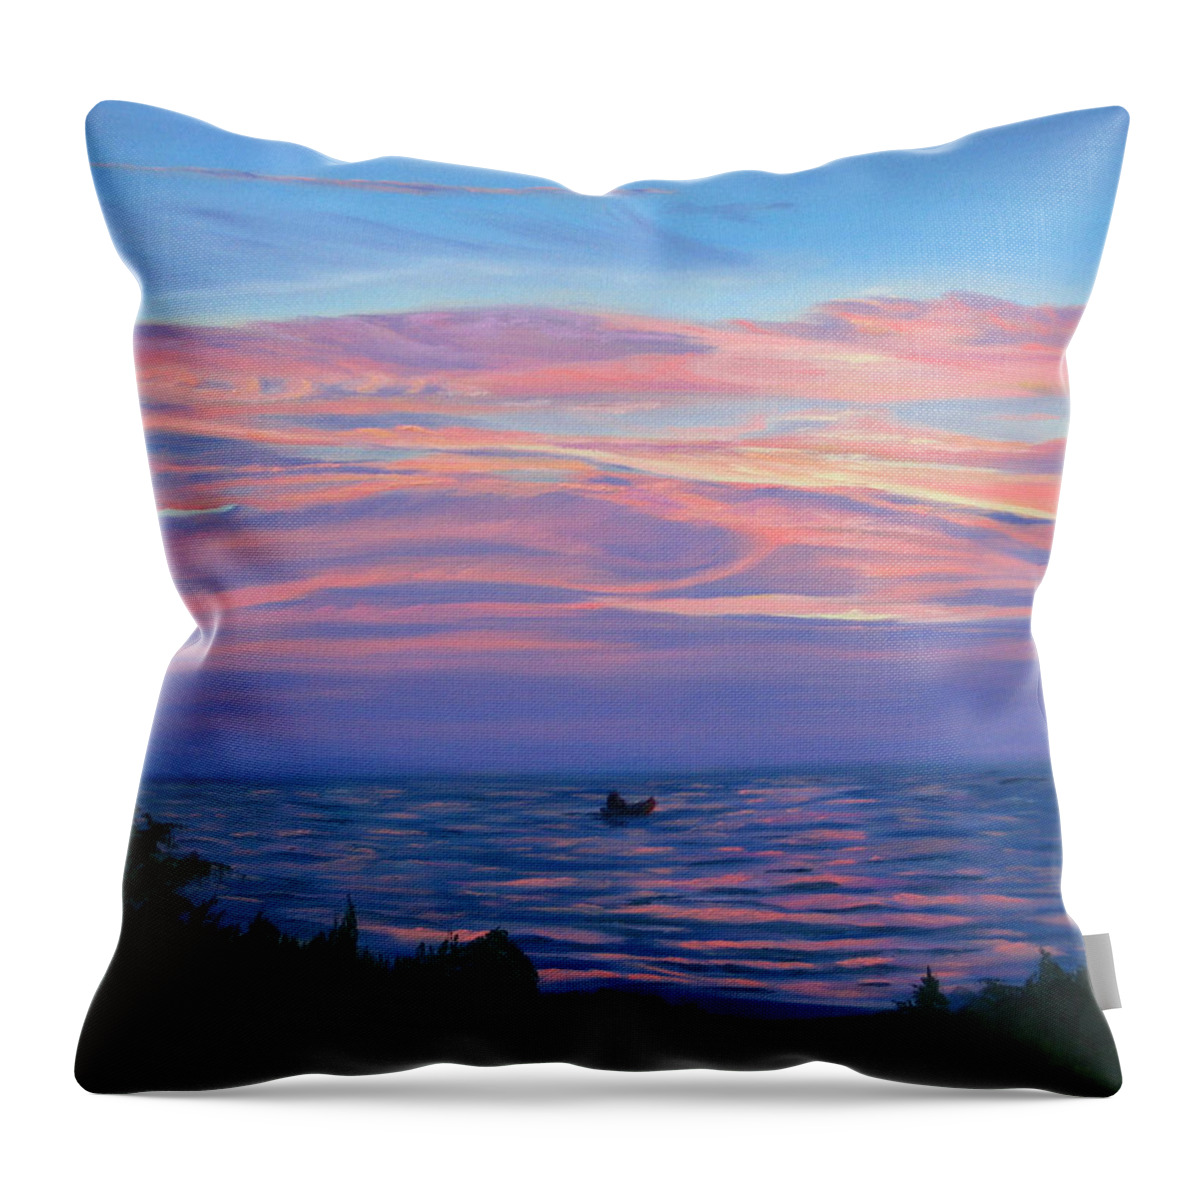 Seascape Throw Pillow featuring the painting Sunset Bay by Lea Novak